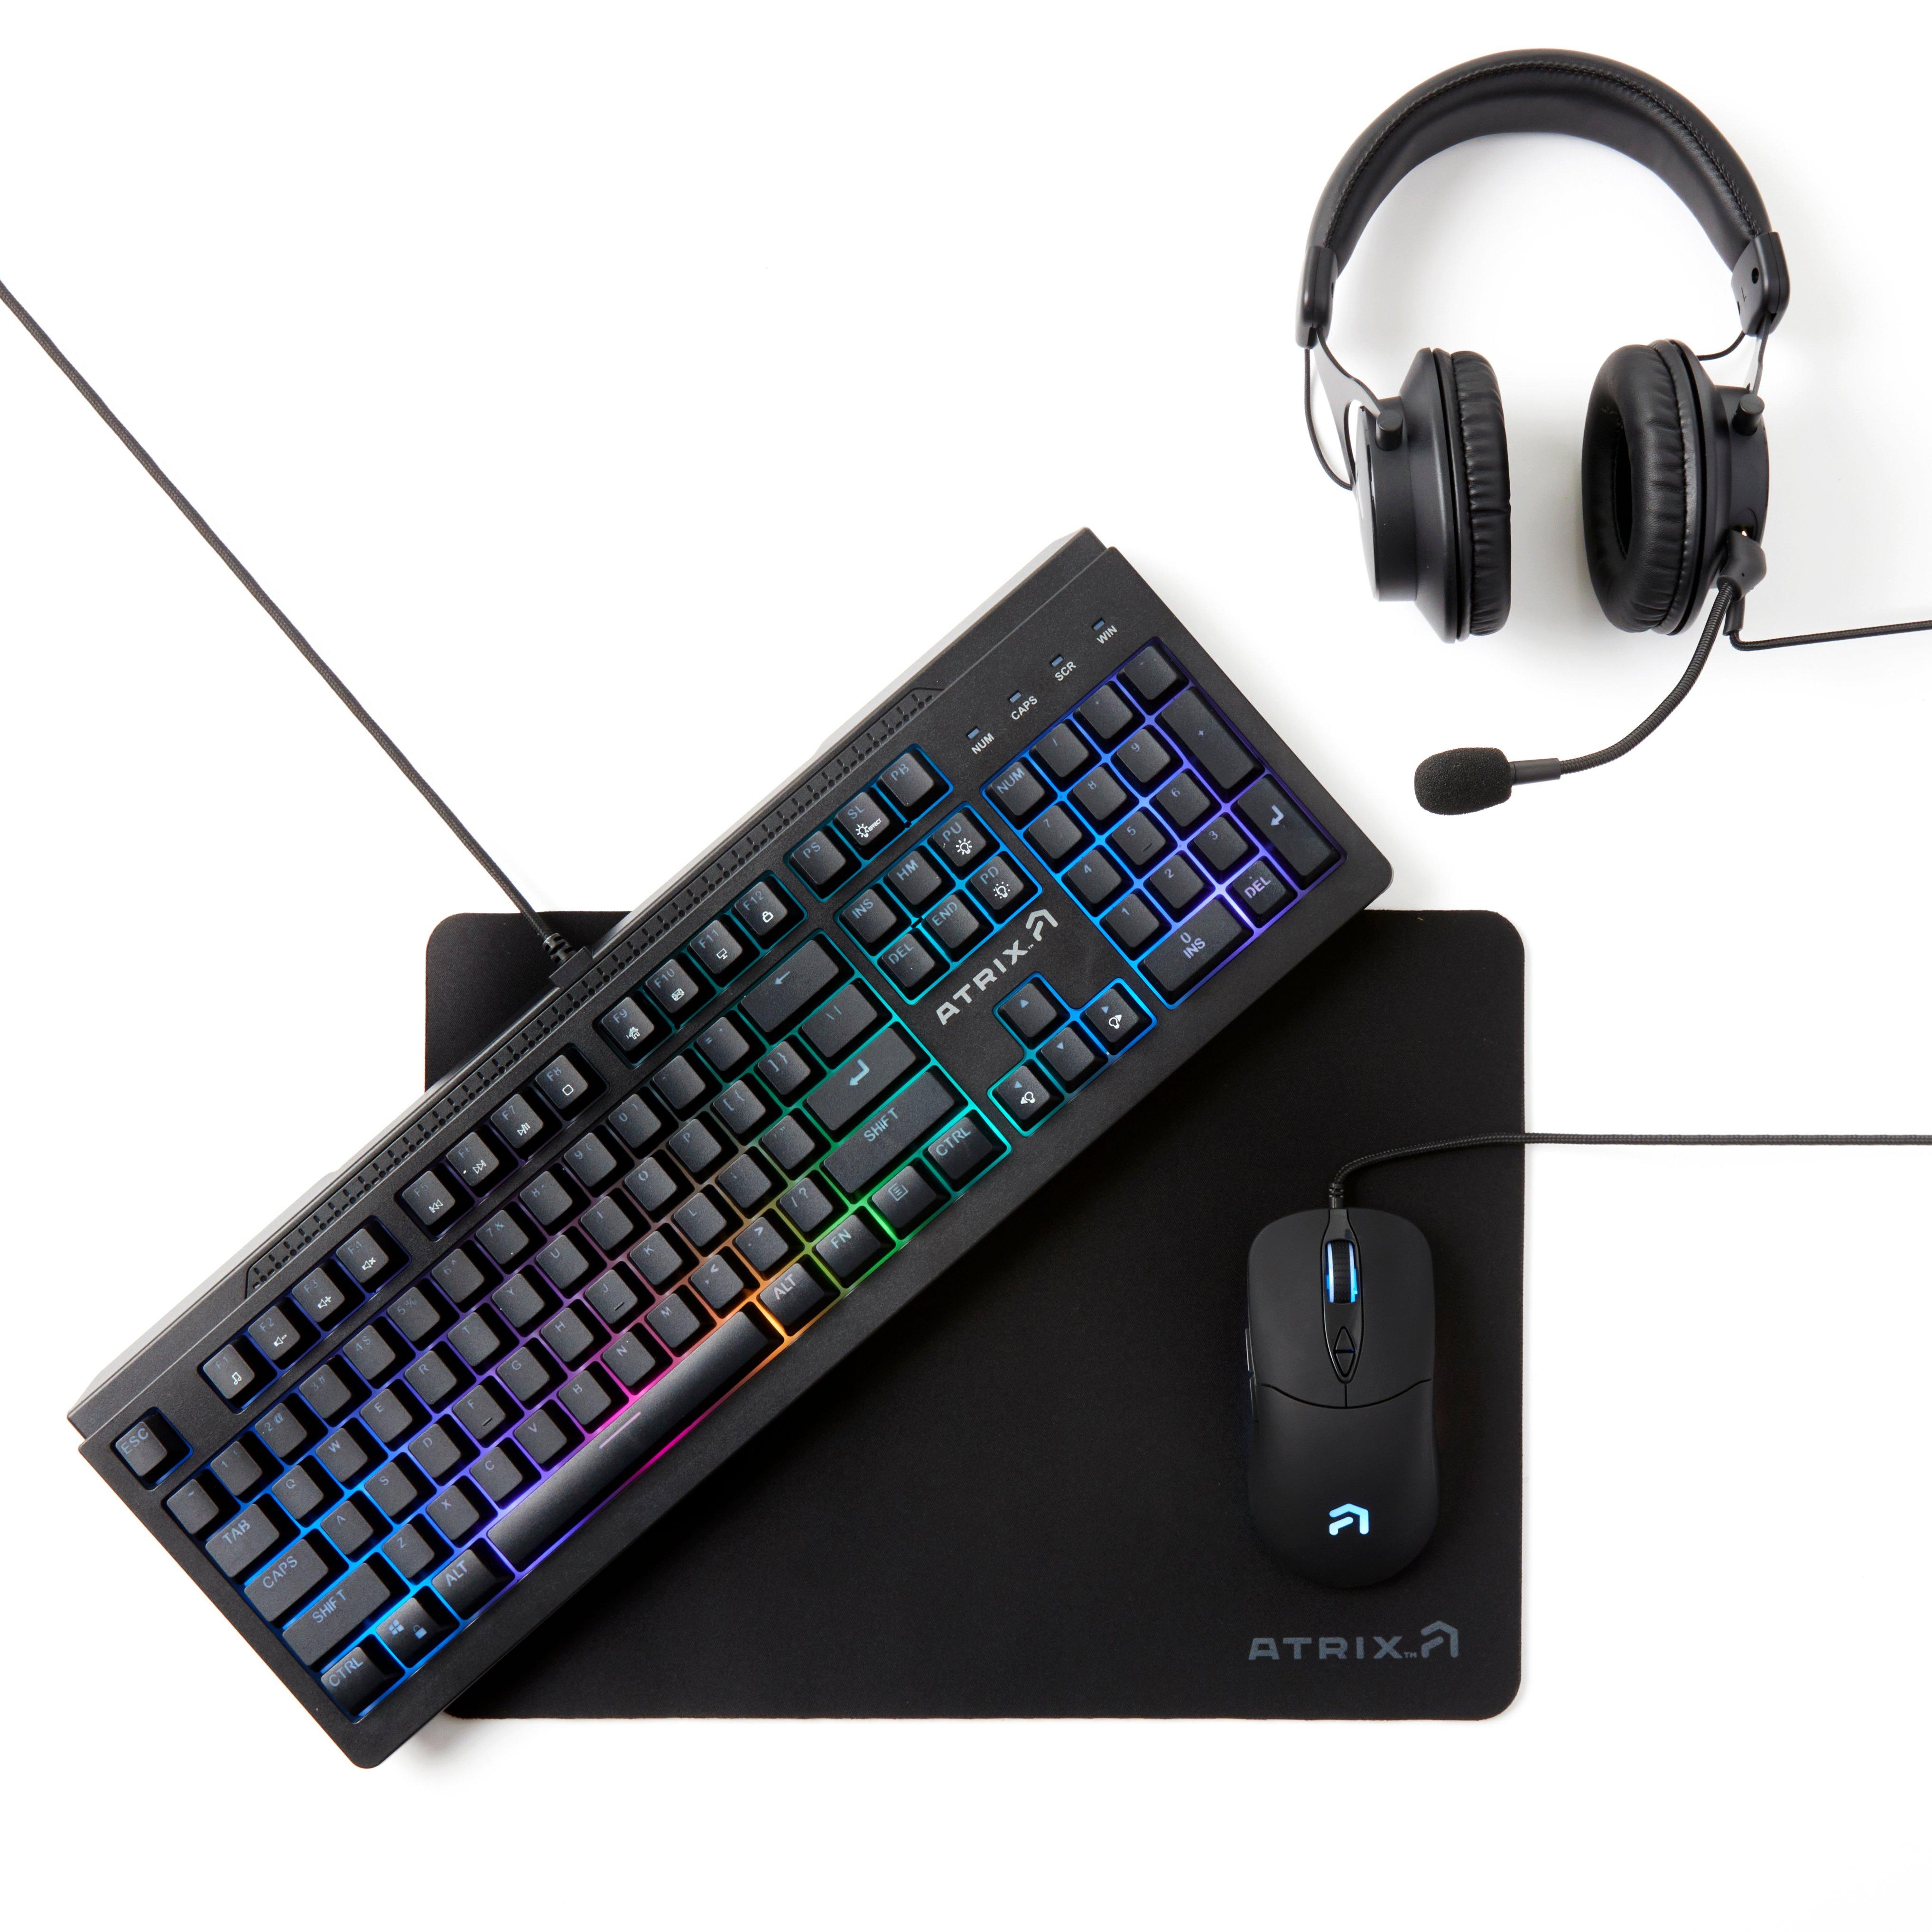 details verdiepen Onderzoek Atrix PC Gaming Bundle with L-Series Wired Gaming Headset, Wired Gaming  Keyboard with RGB, 7-Button Wired Gaming Mouse, and Mouse Pad | GameStop